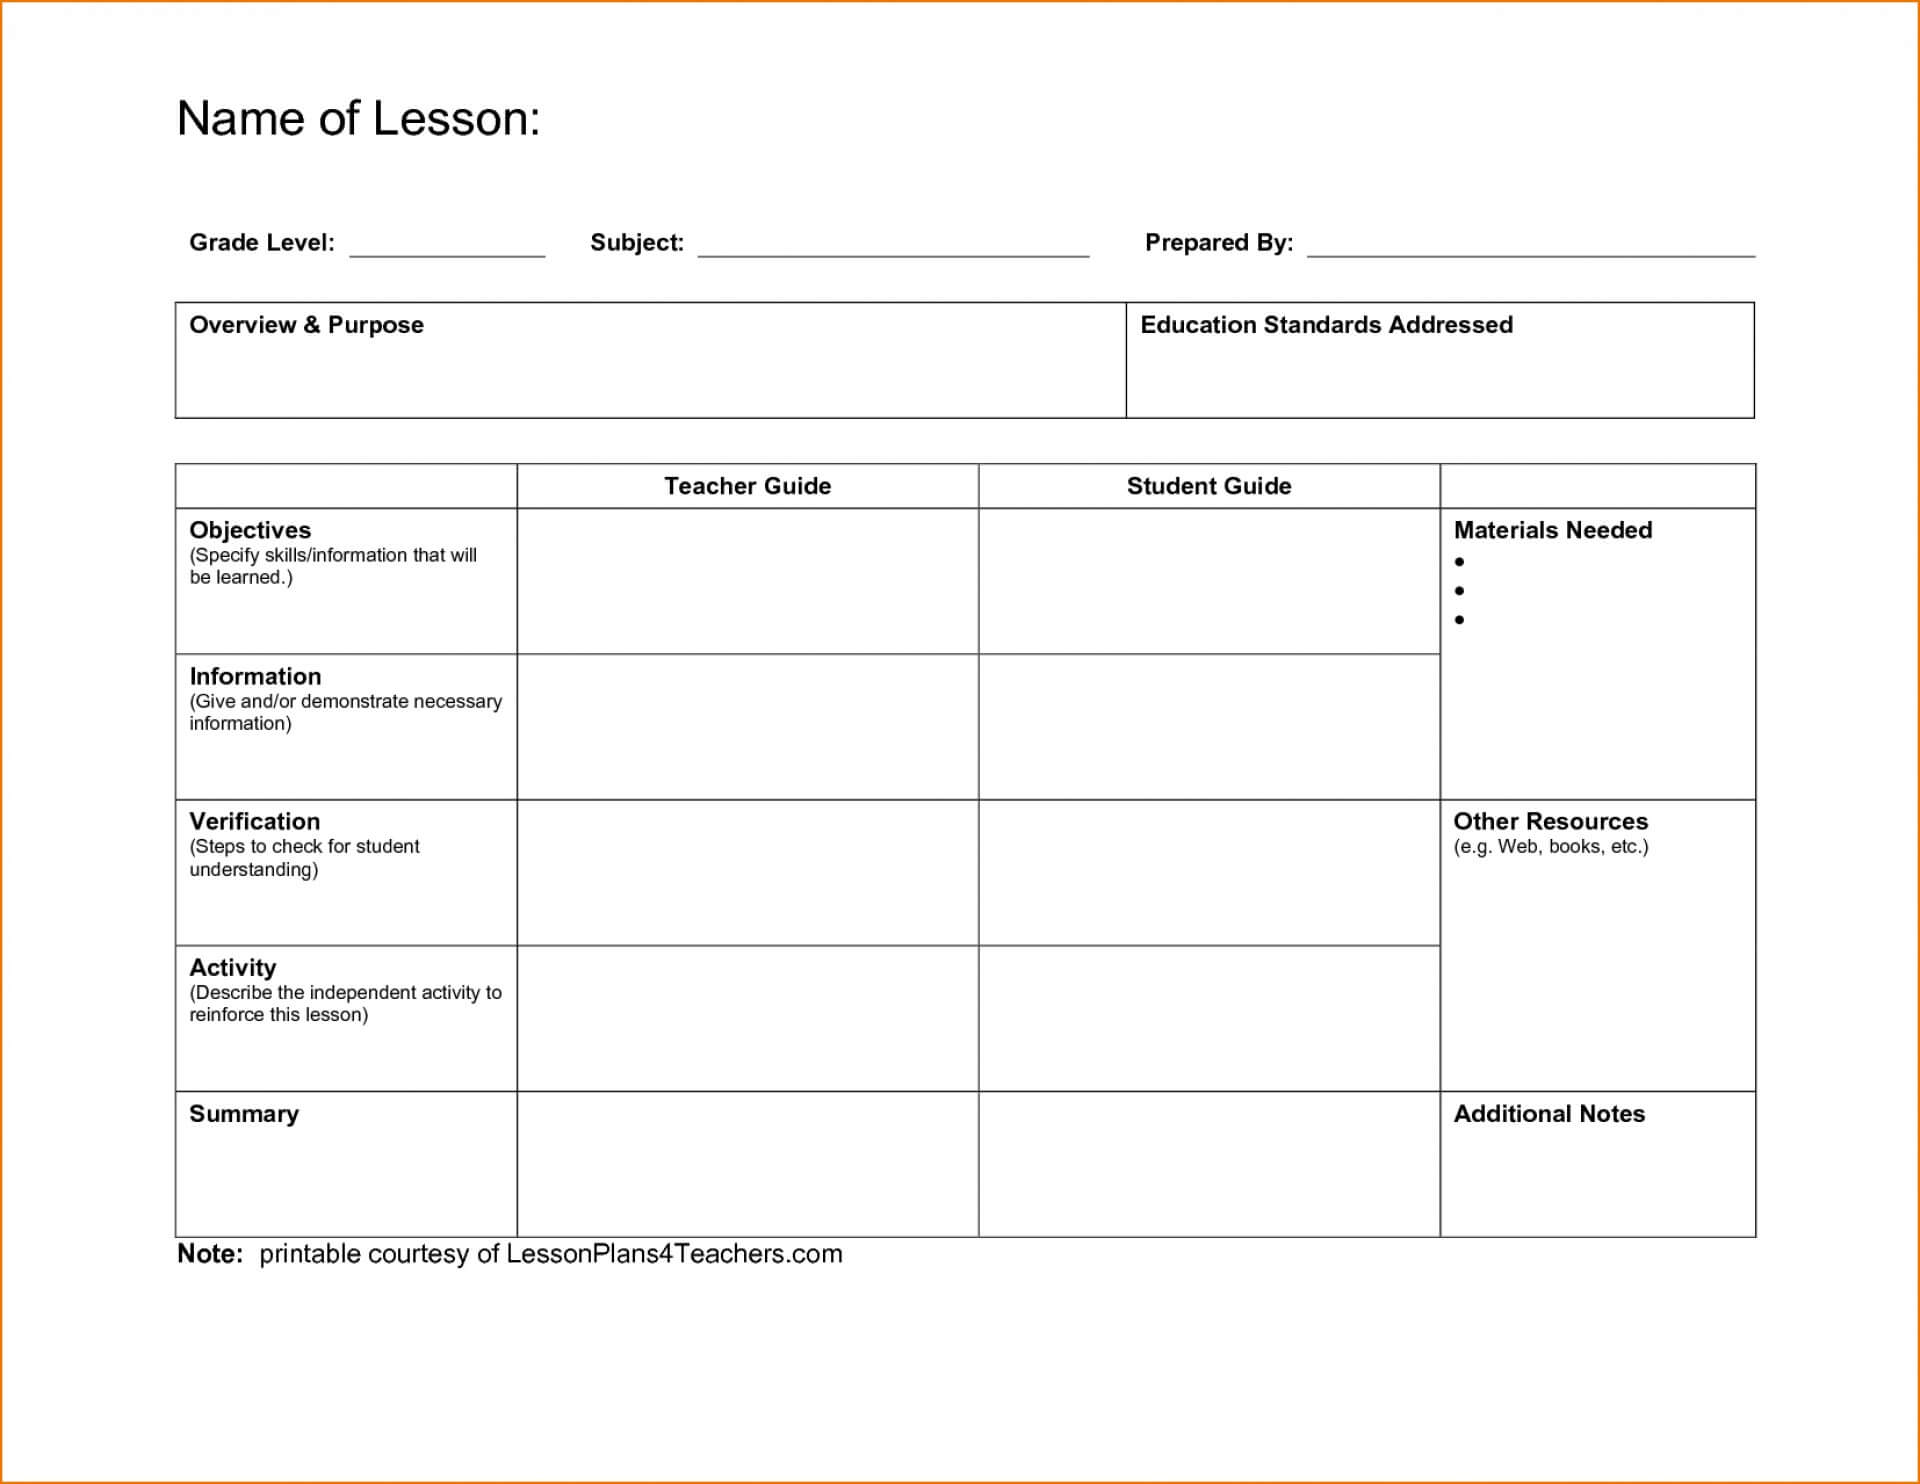 021 Ideas Collection New Madeline Hunter Lesson Plan In Madeline Hunter Lesson Plan Template Word